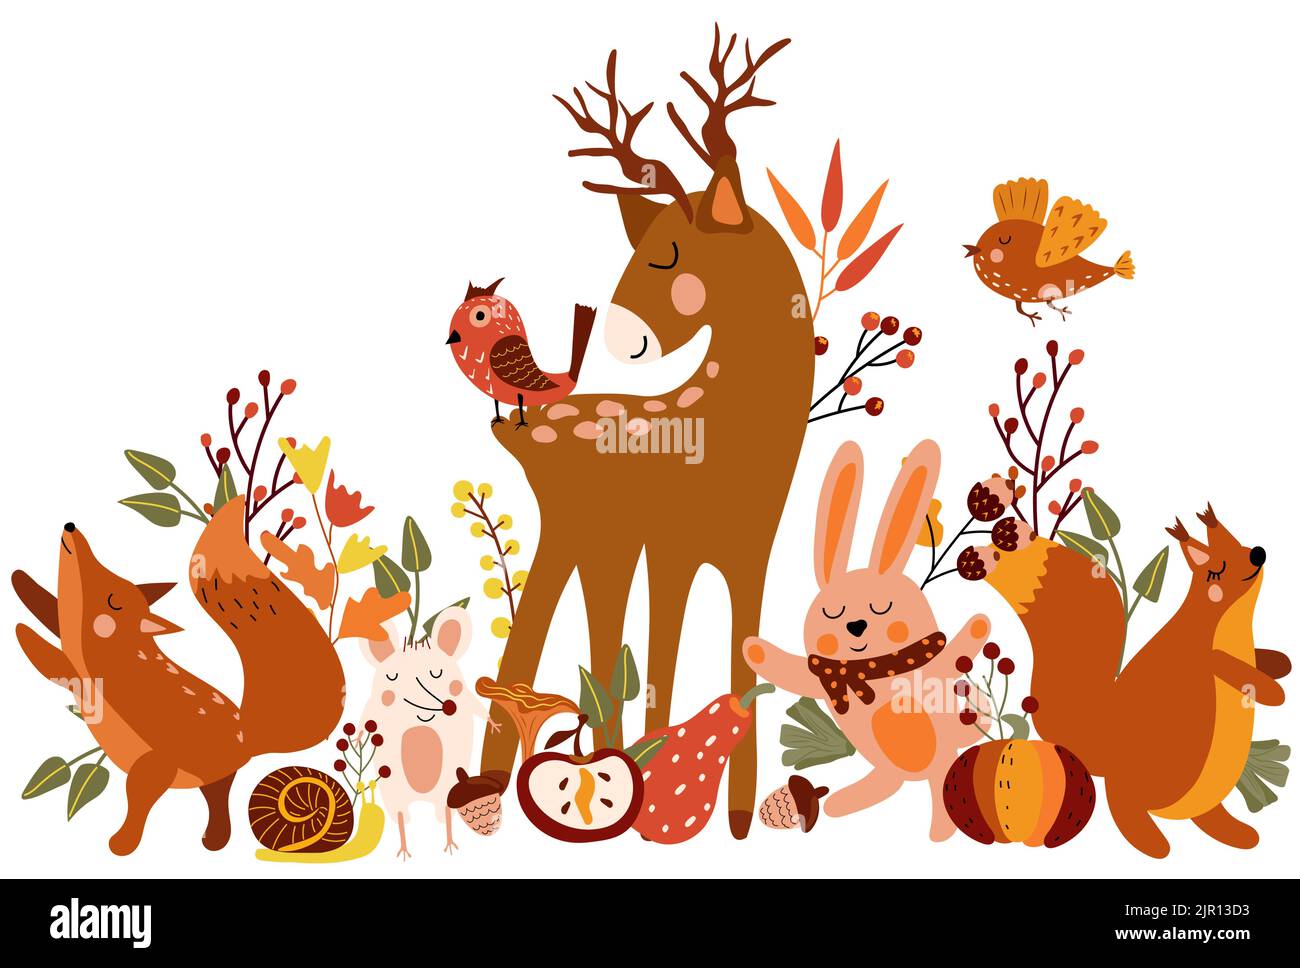 Cute Autumn Animals, Funny deer, cunning fox, mouse, fly bird, cute squirrel, and colorful pumpkin, leaves. Perfect for web, harvest festival, banner, poster, card and Thanksgiving. Vector. Stock Vector